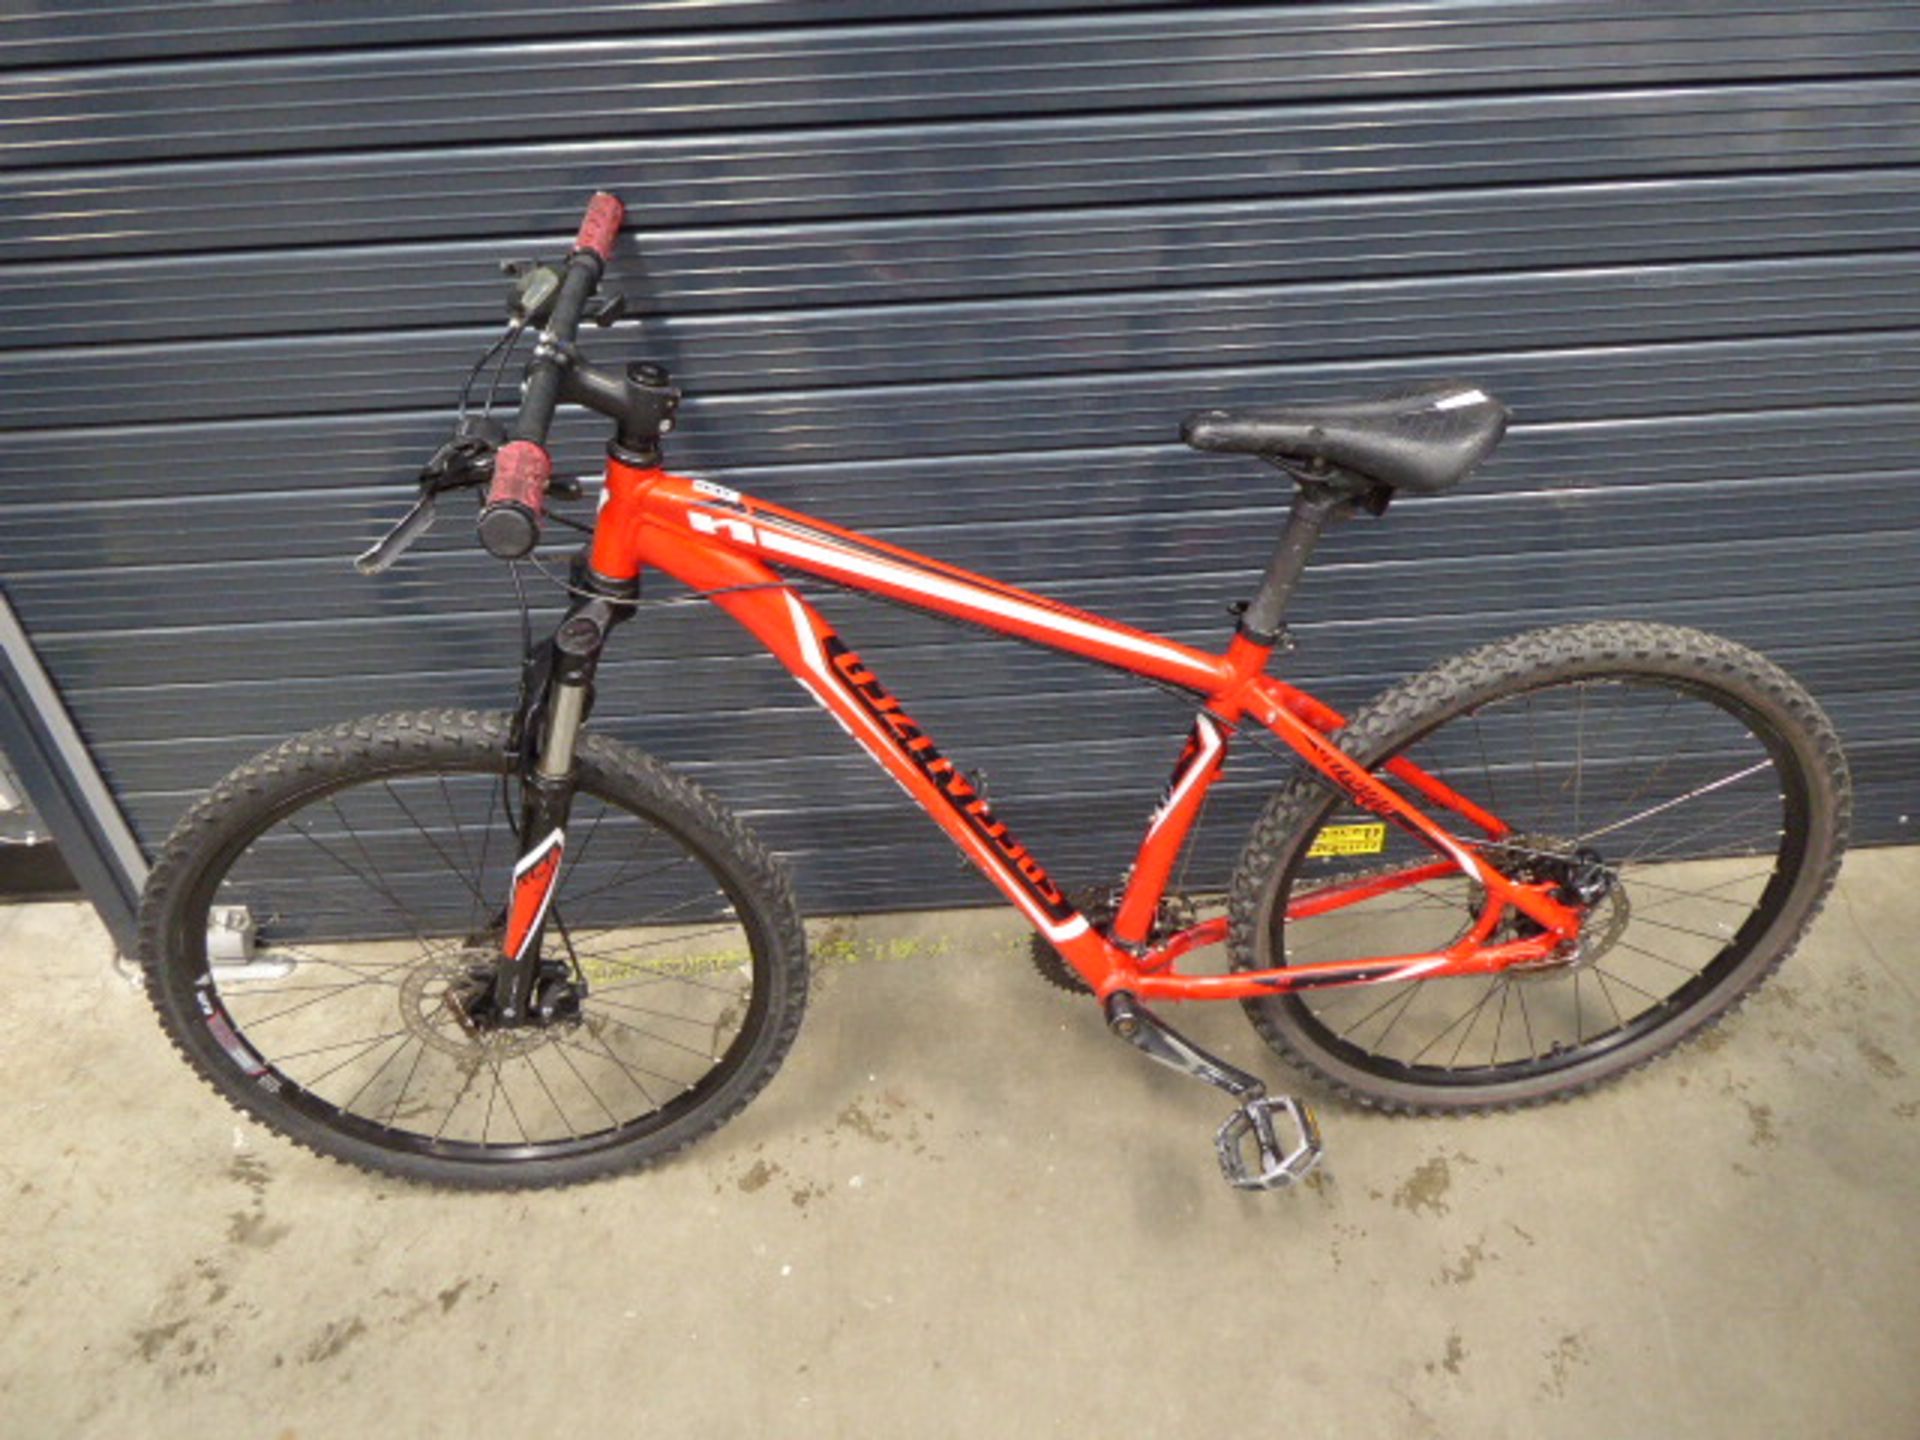 Red and white specialized gent's mountain bike